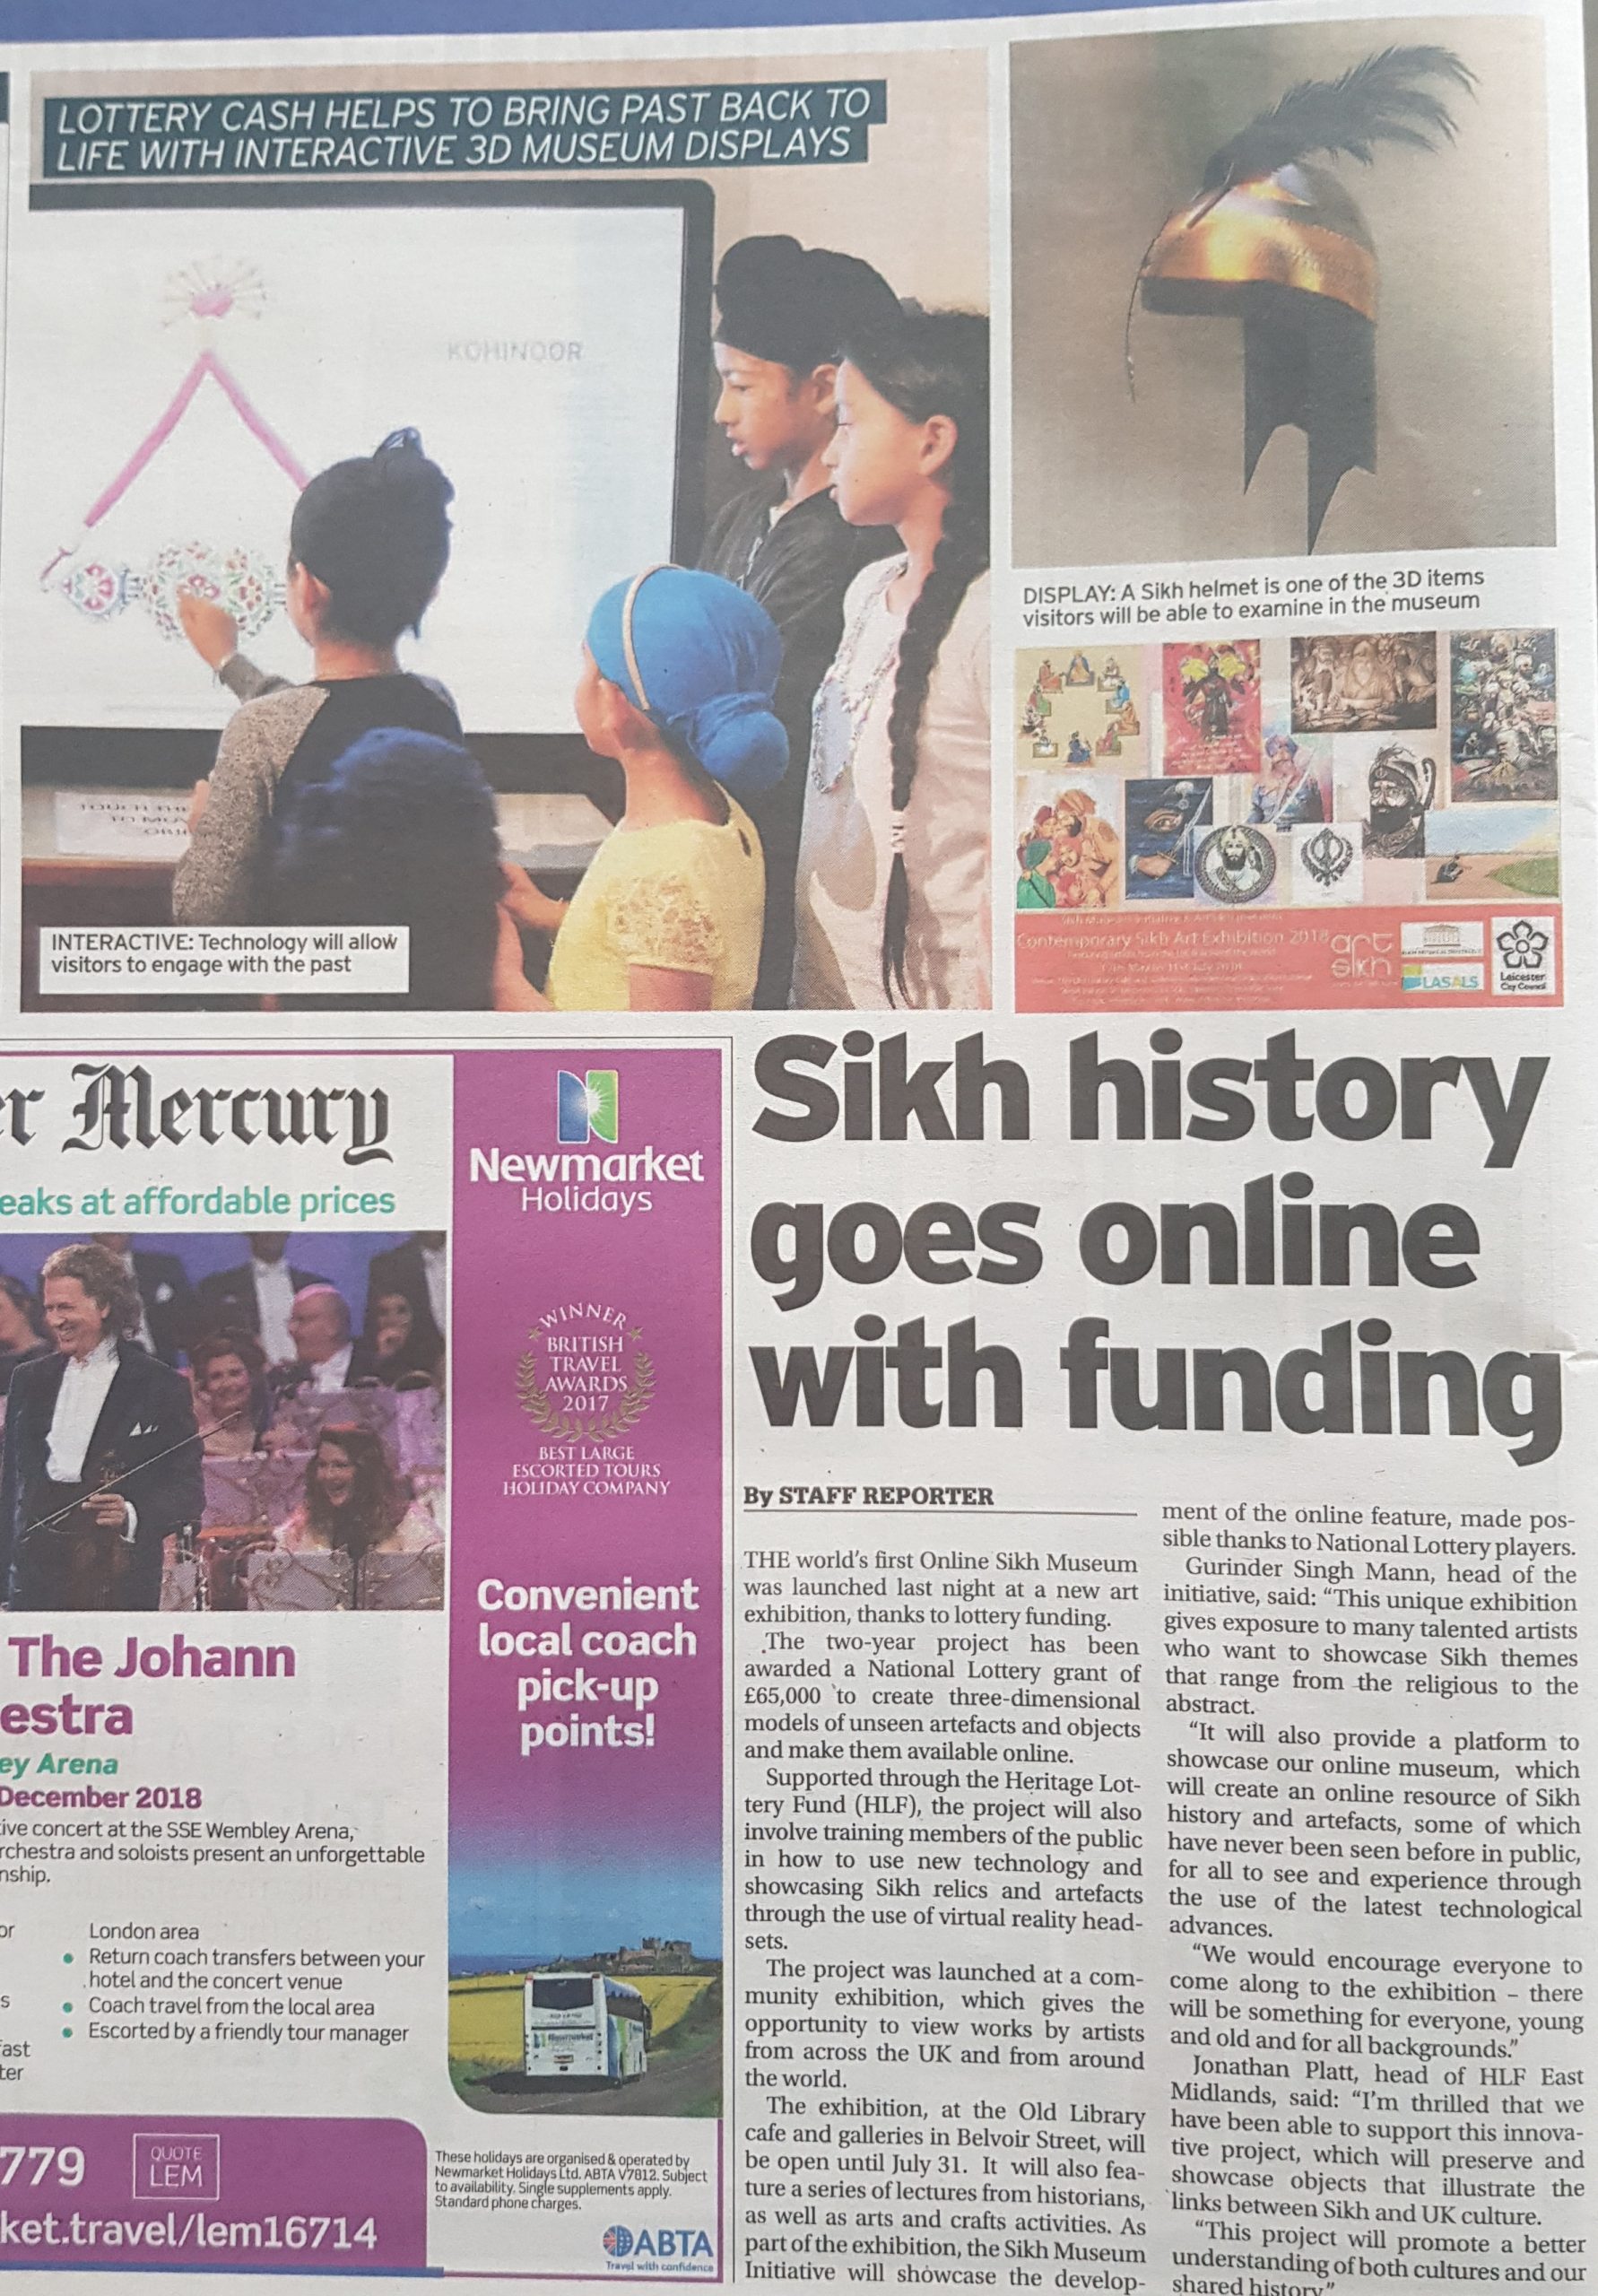 Leicester Mercury Coverage of the online Sikh Museum